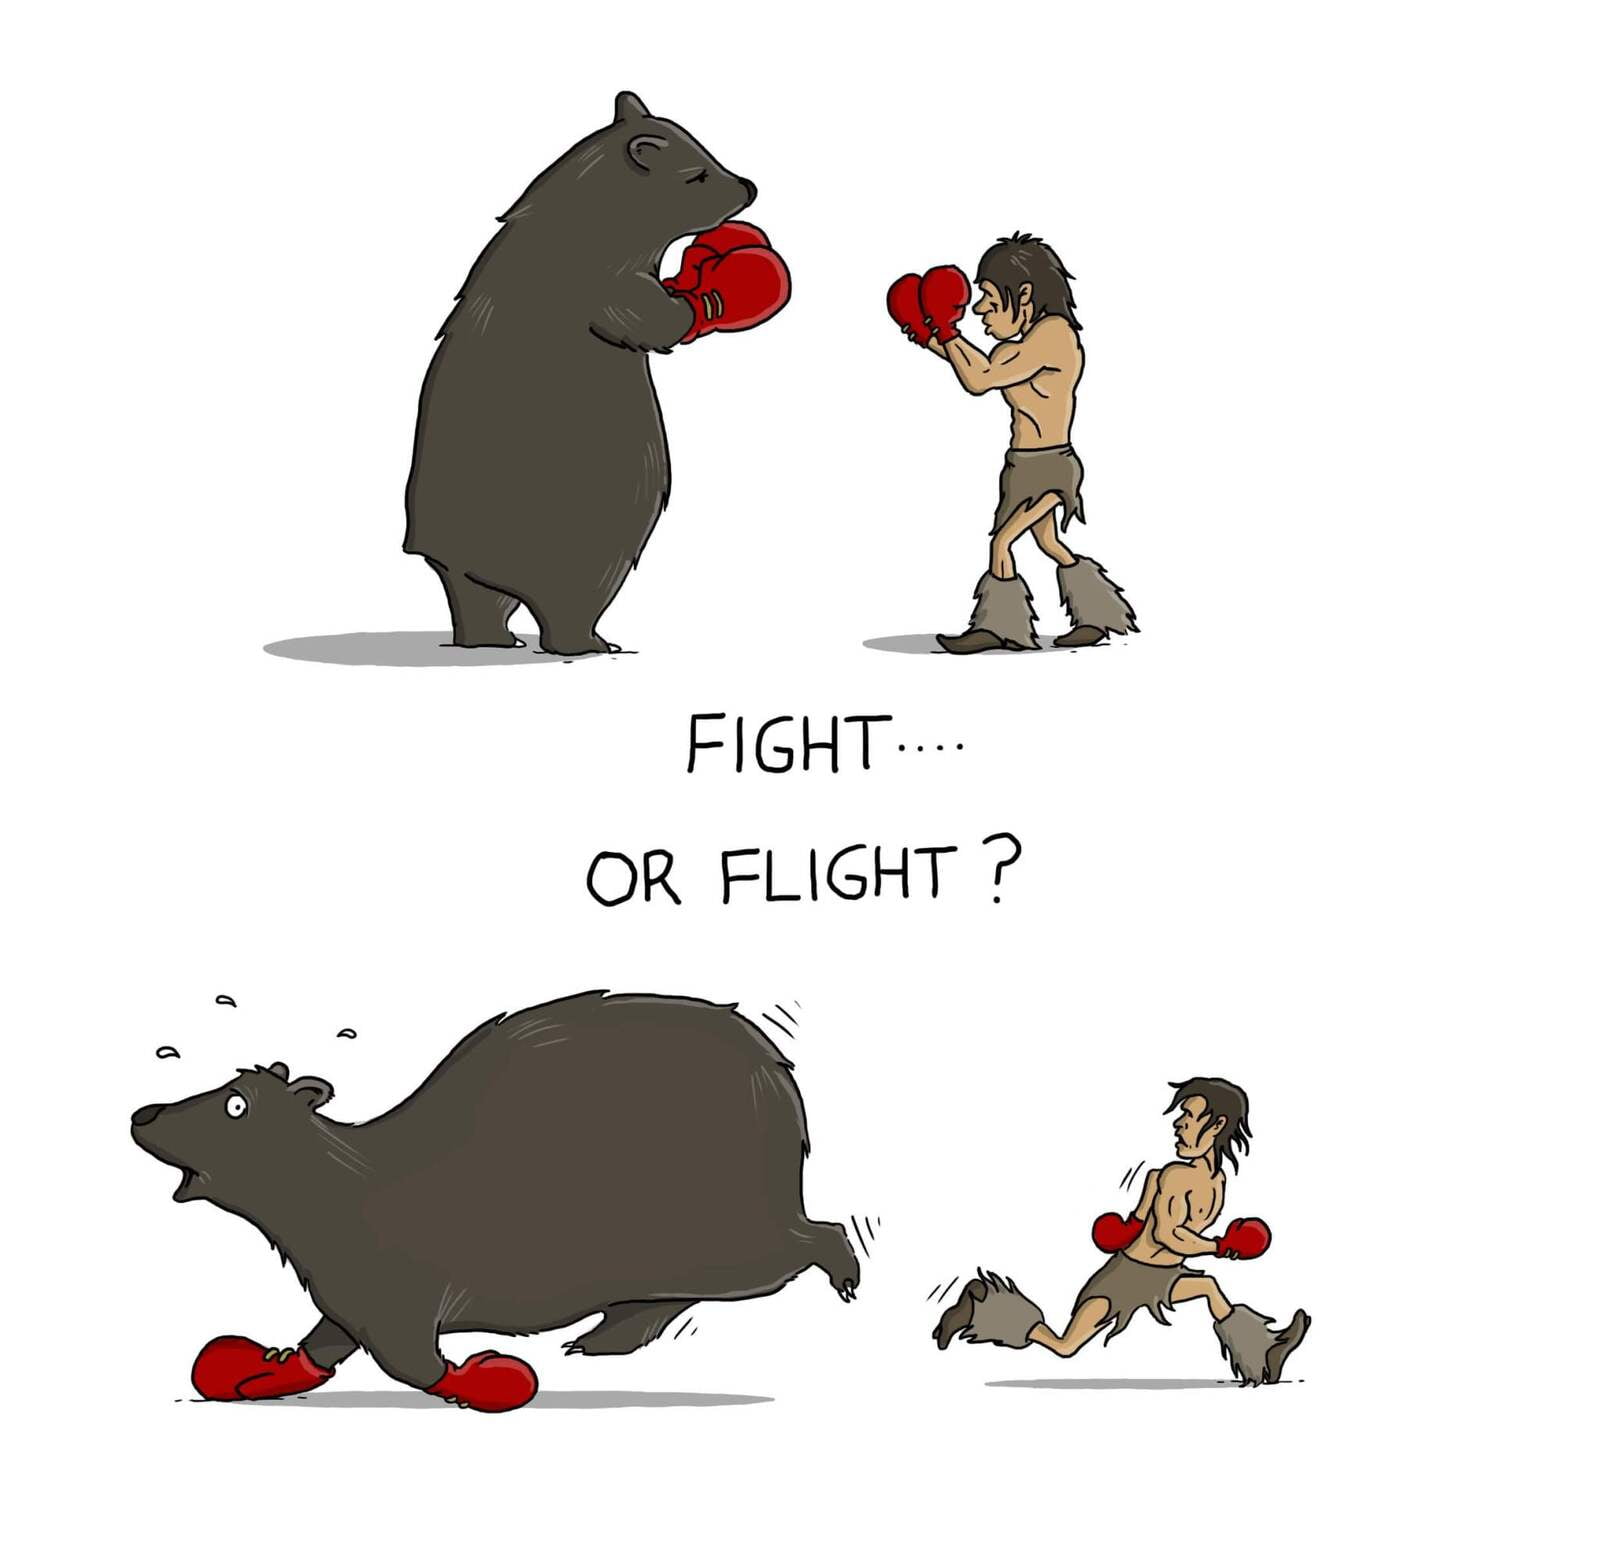 Fight or flight, revisited